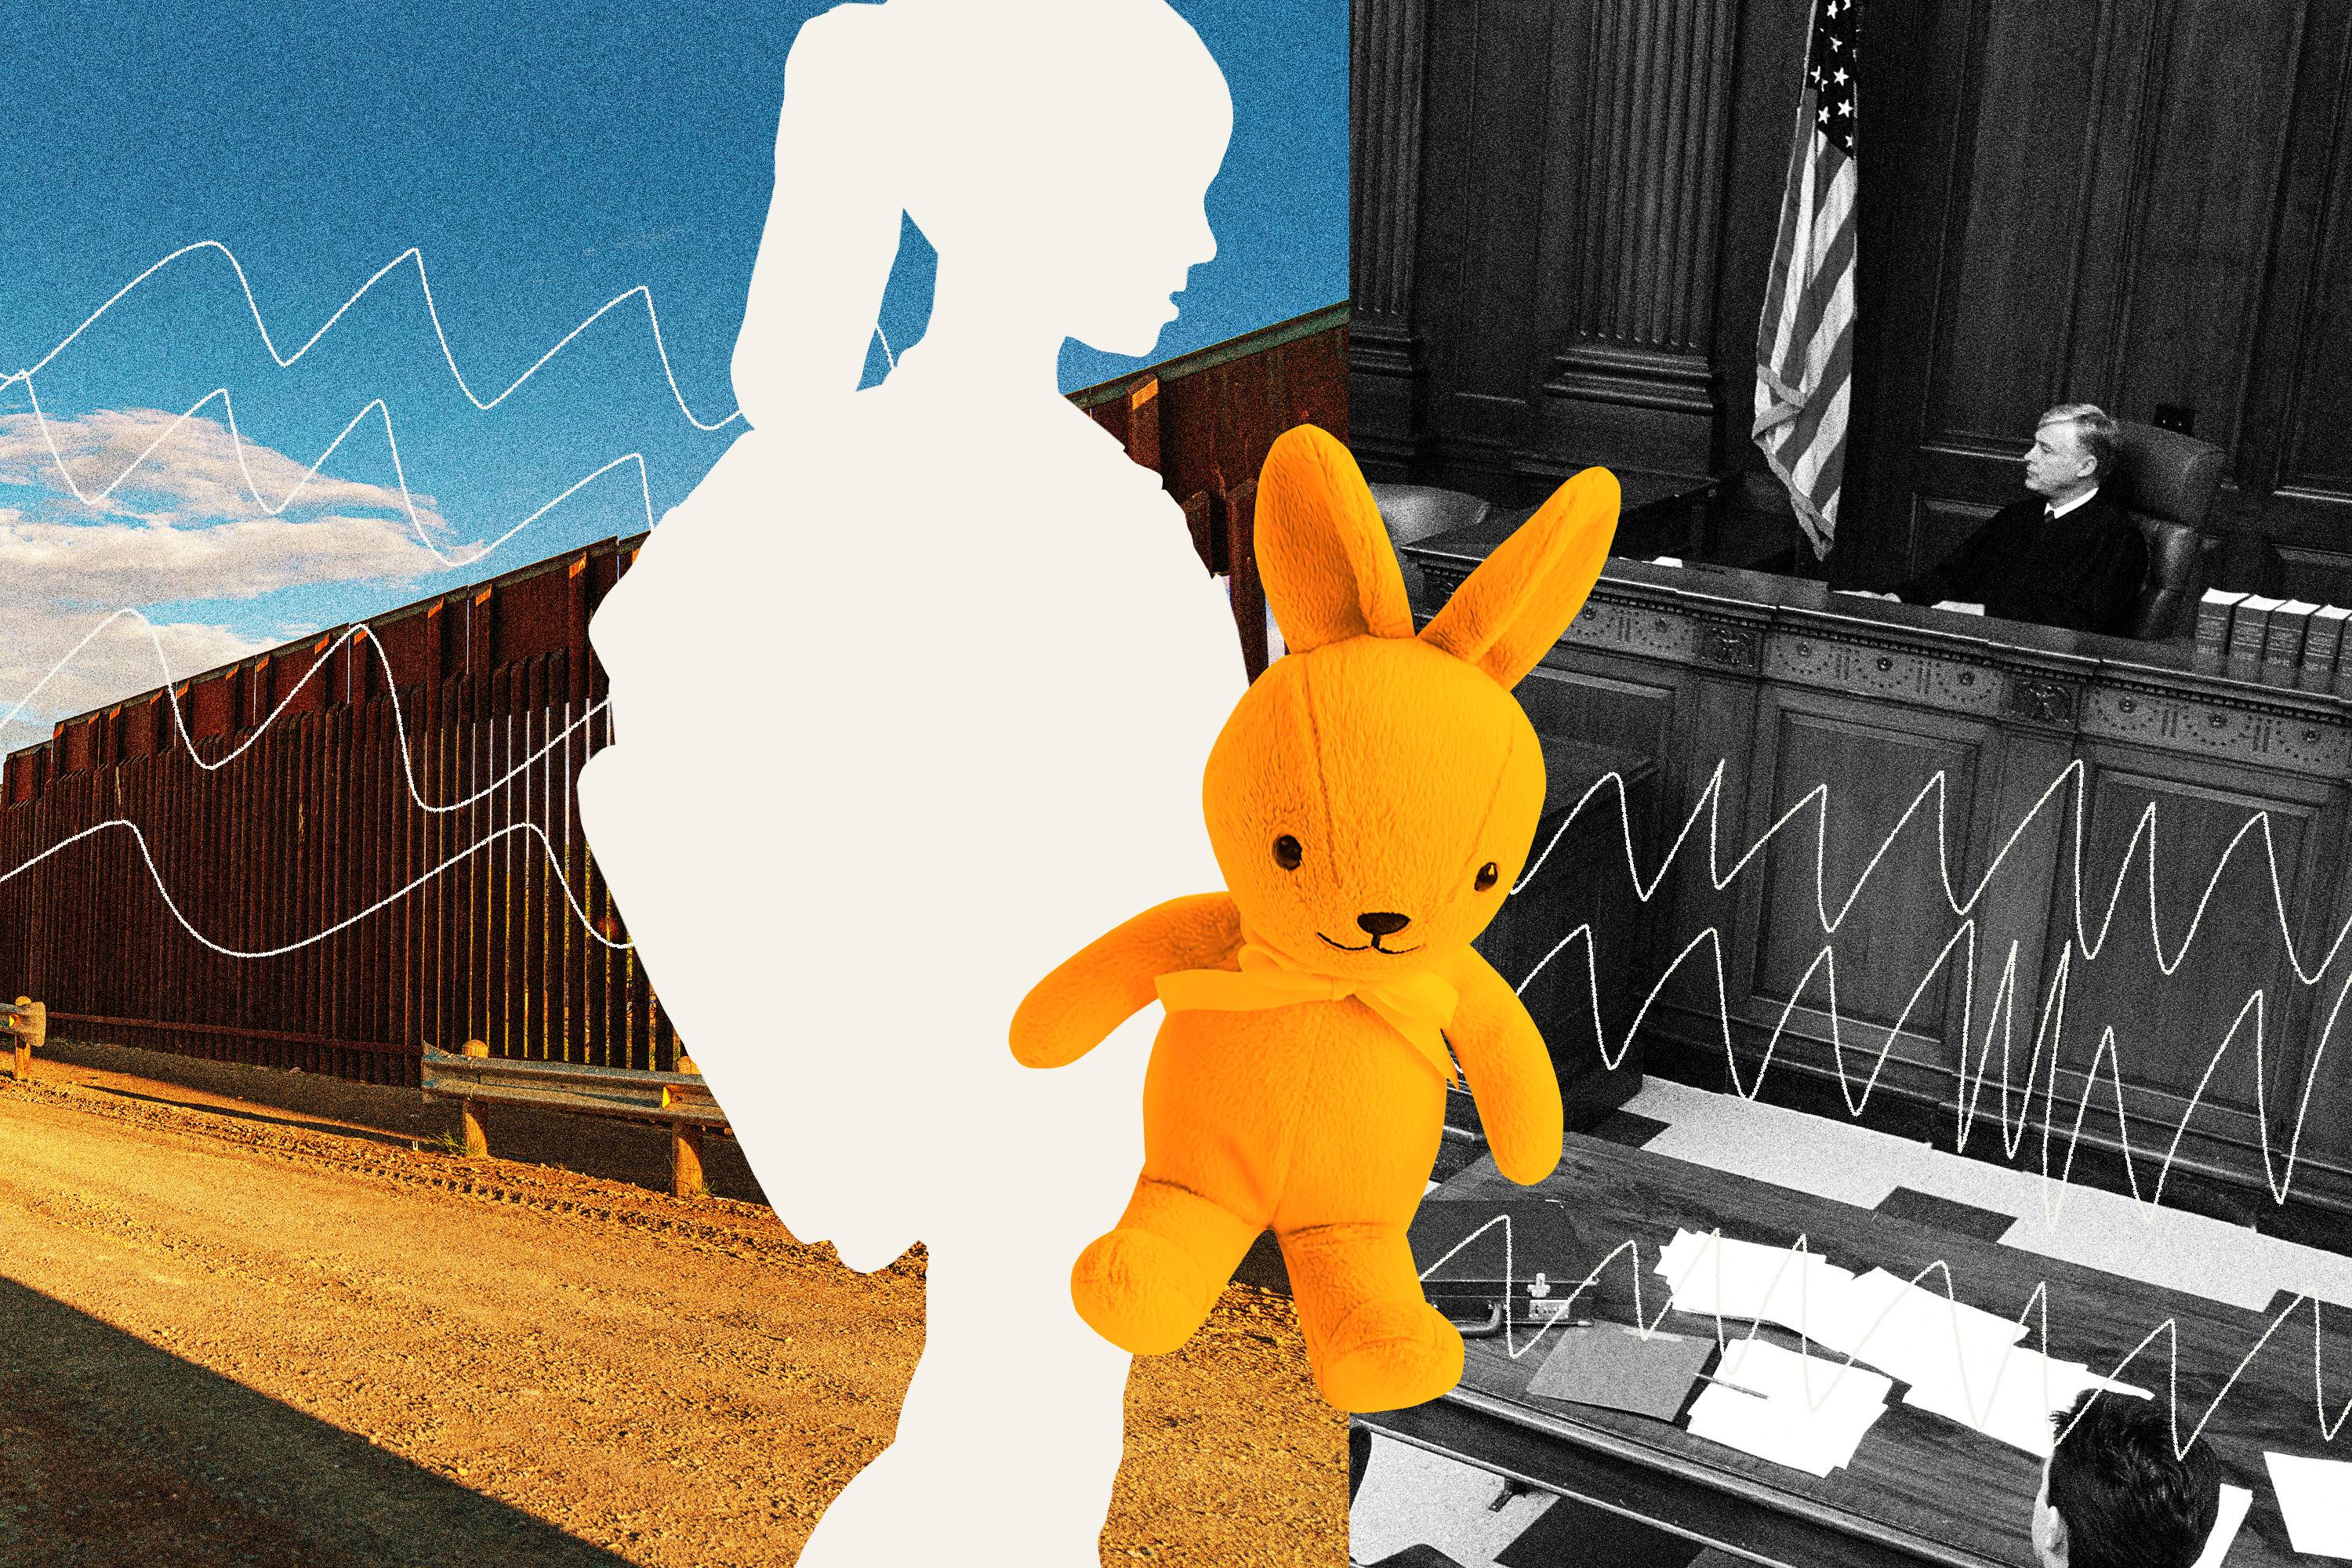 Photo collage of silhouette of young girl with ponytail and backpack next to bright orange stuffed toy rabbit. The background shows on the left a photo of the border wall between the USA and Mexico, and on the right a grayscale photo of a judge in a courtroom.